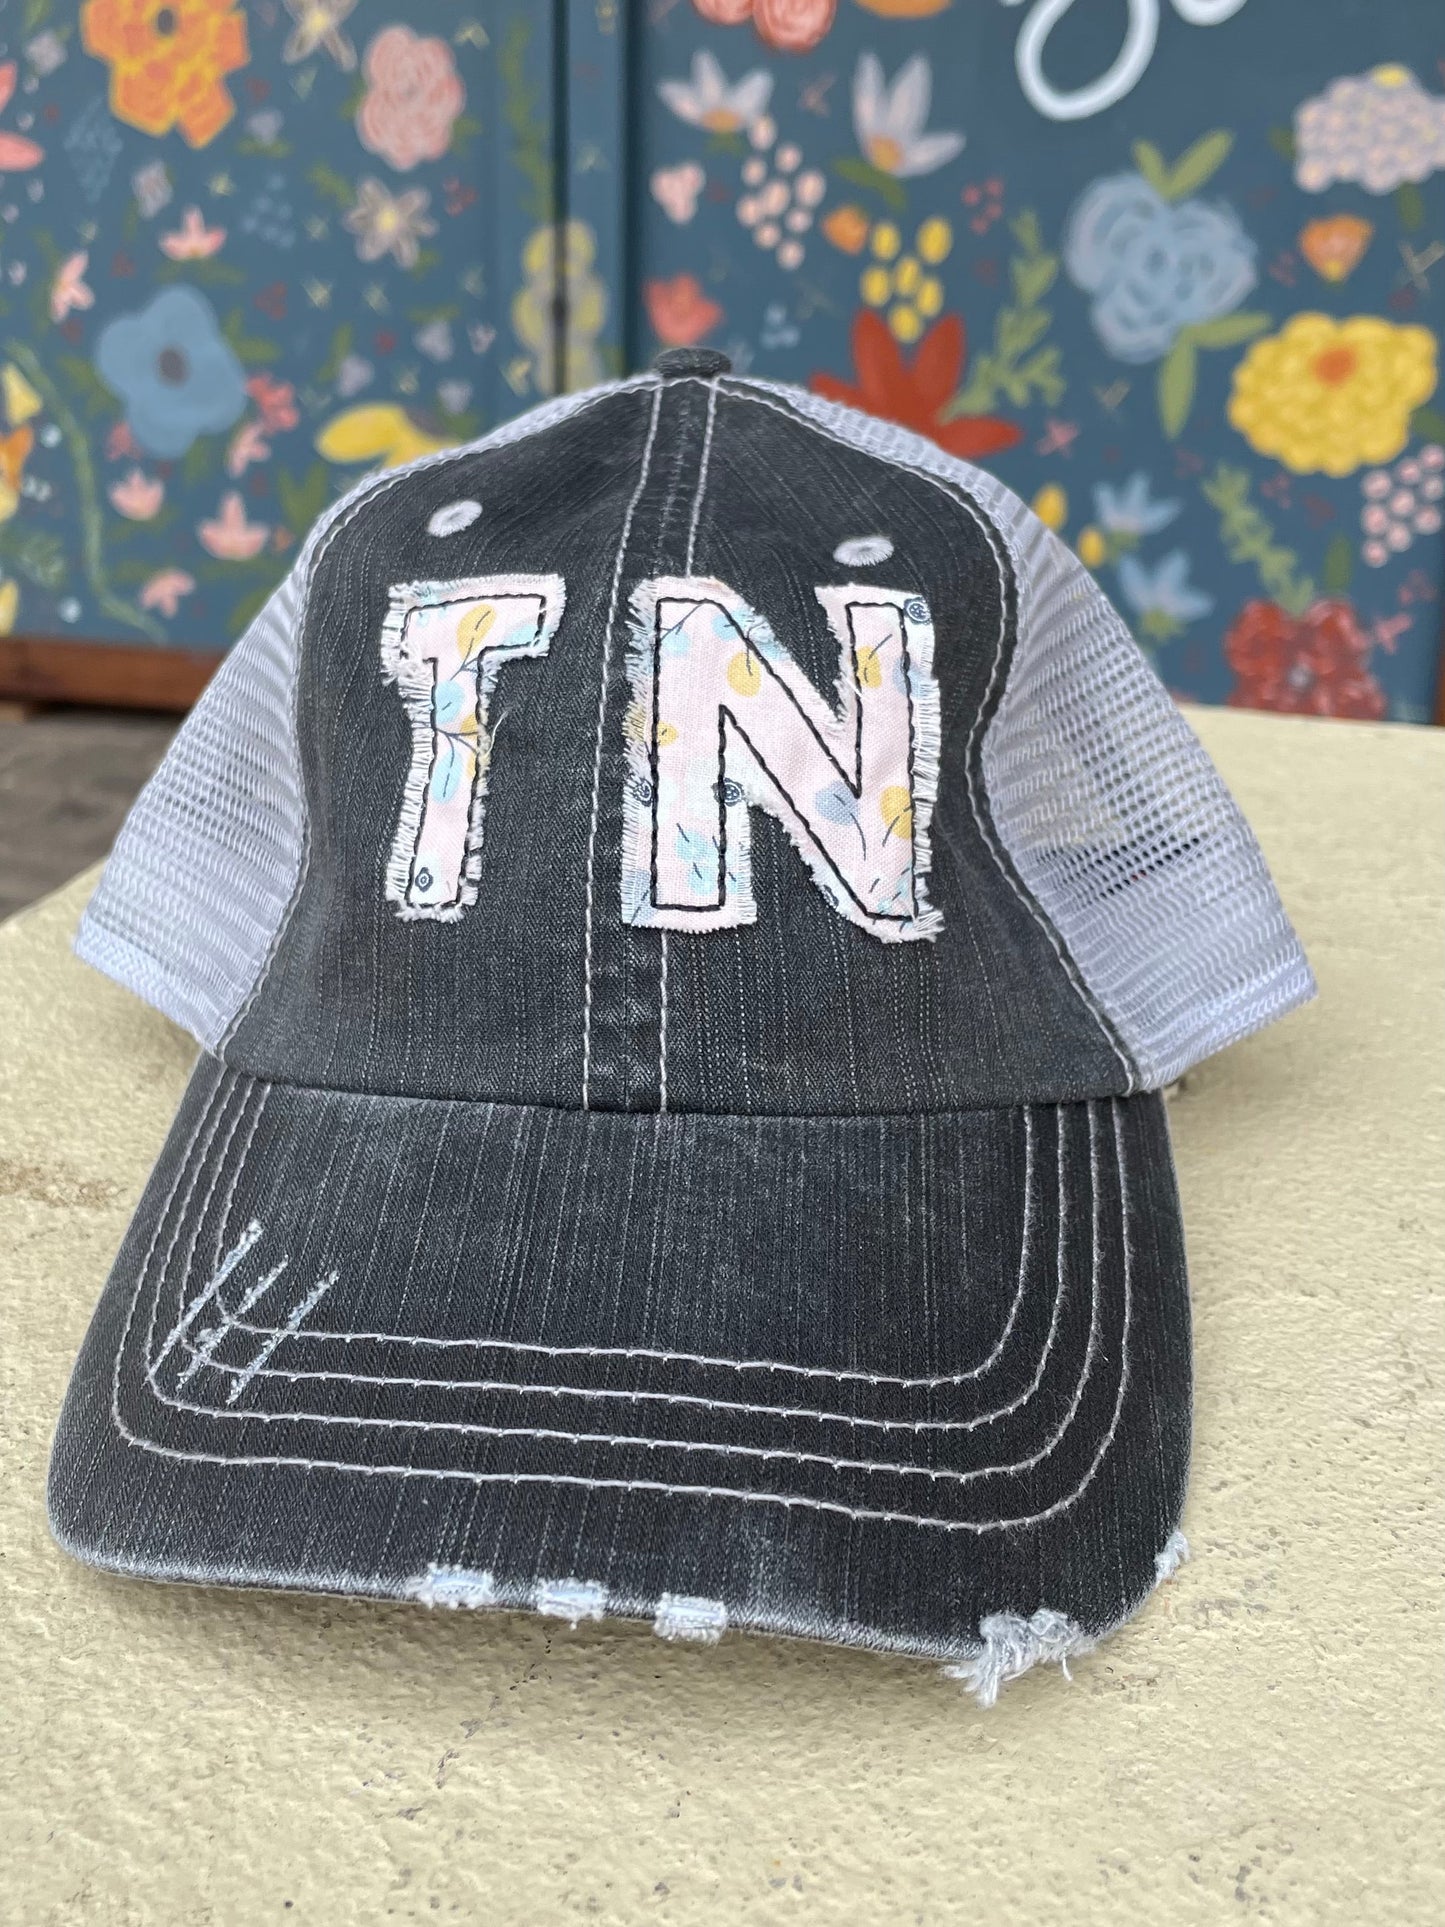 Tennessee Embroidered Emblem with Print Distressed Hat-Apparel > Apparel & Accessories > Clothing Accessories > Hats-Gray Hat with TN Initial Print-Quinn's Mercantile